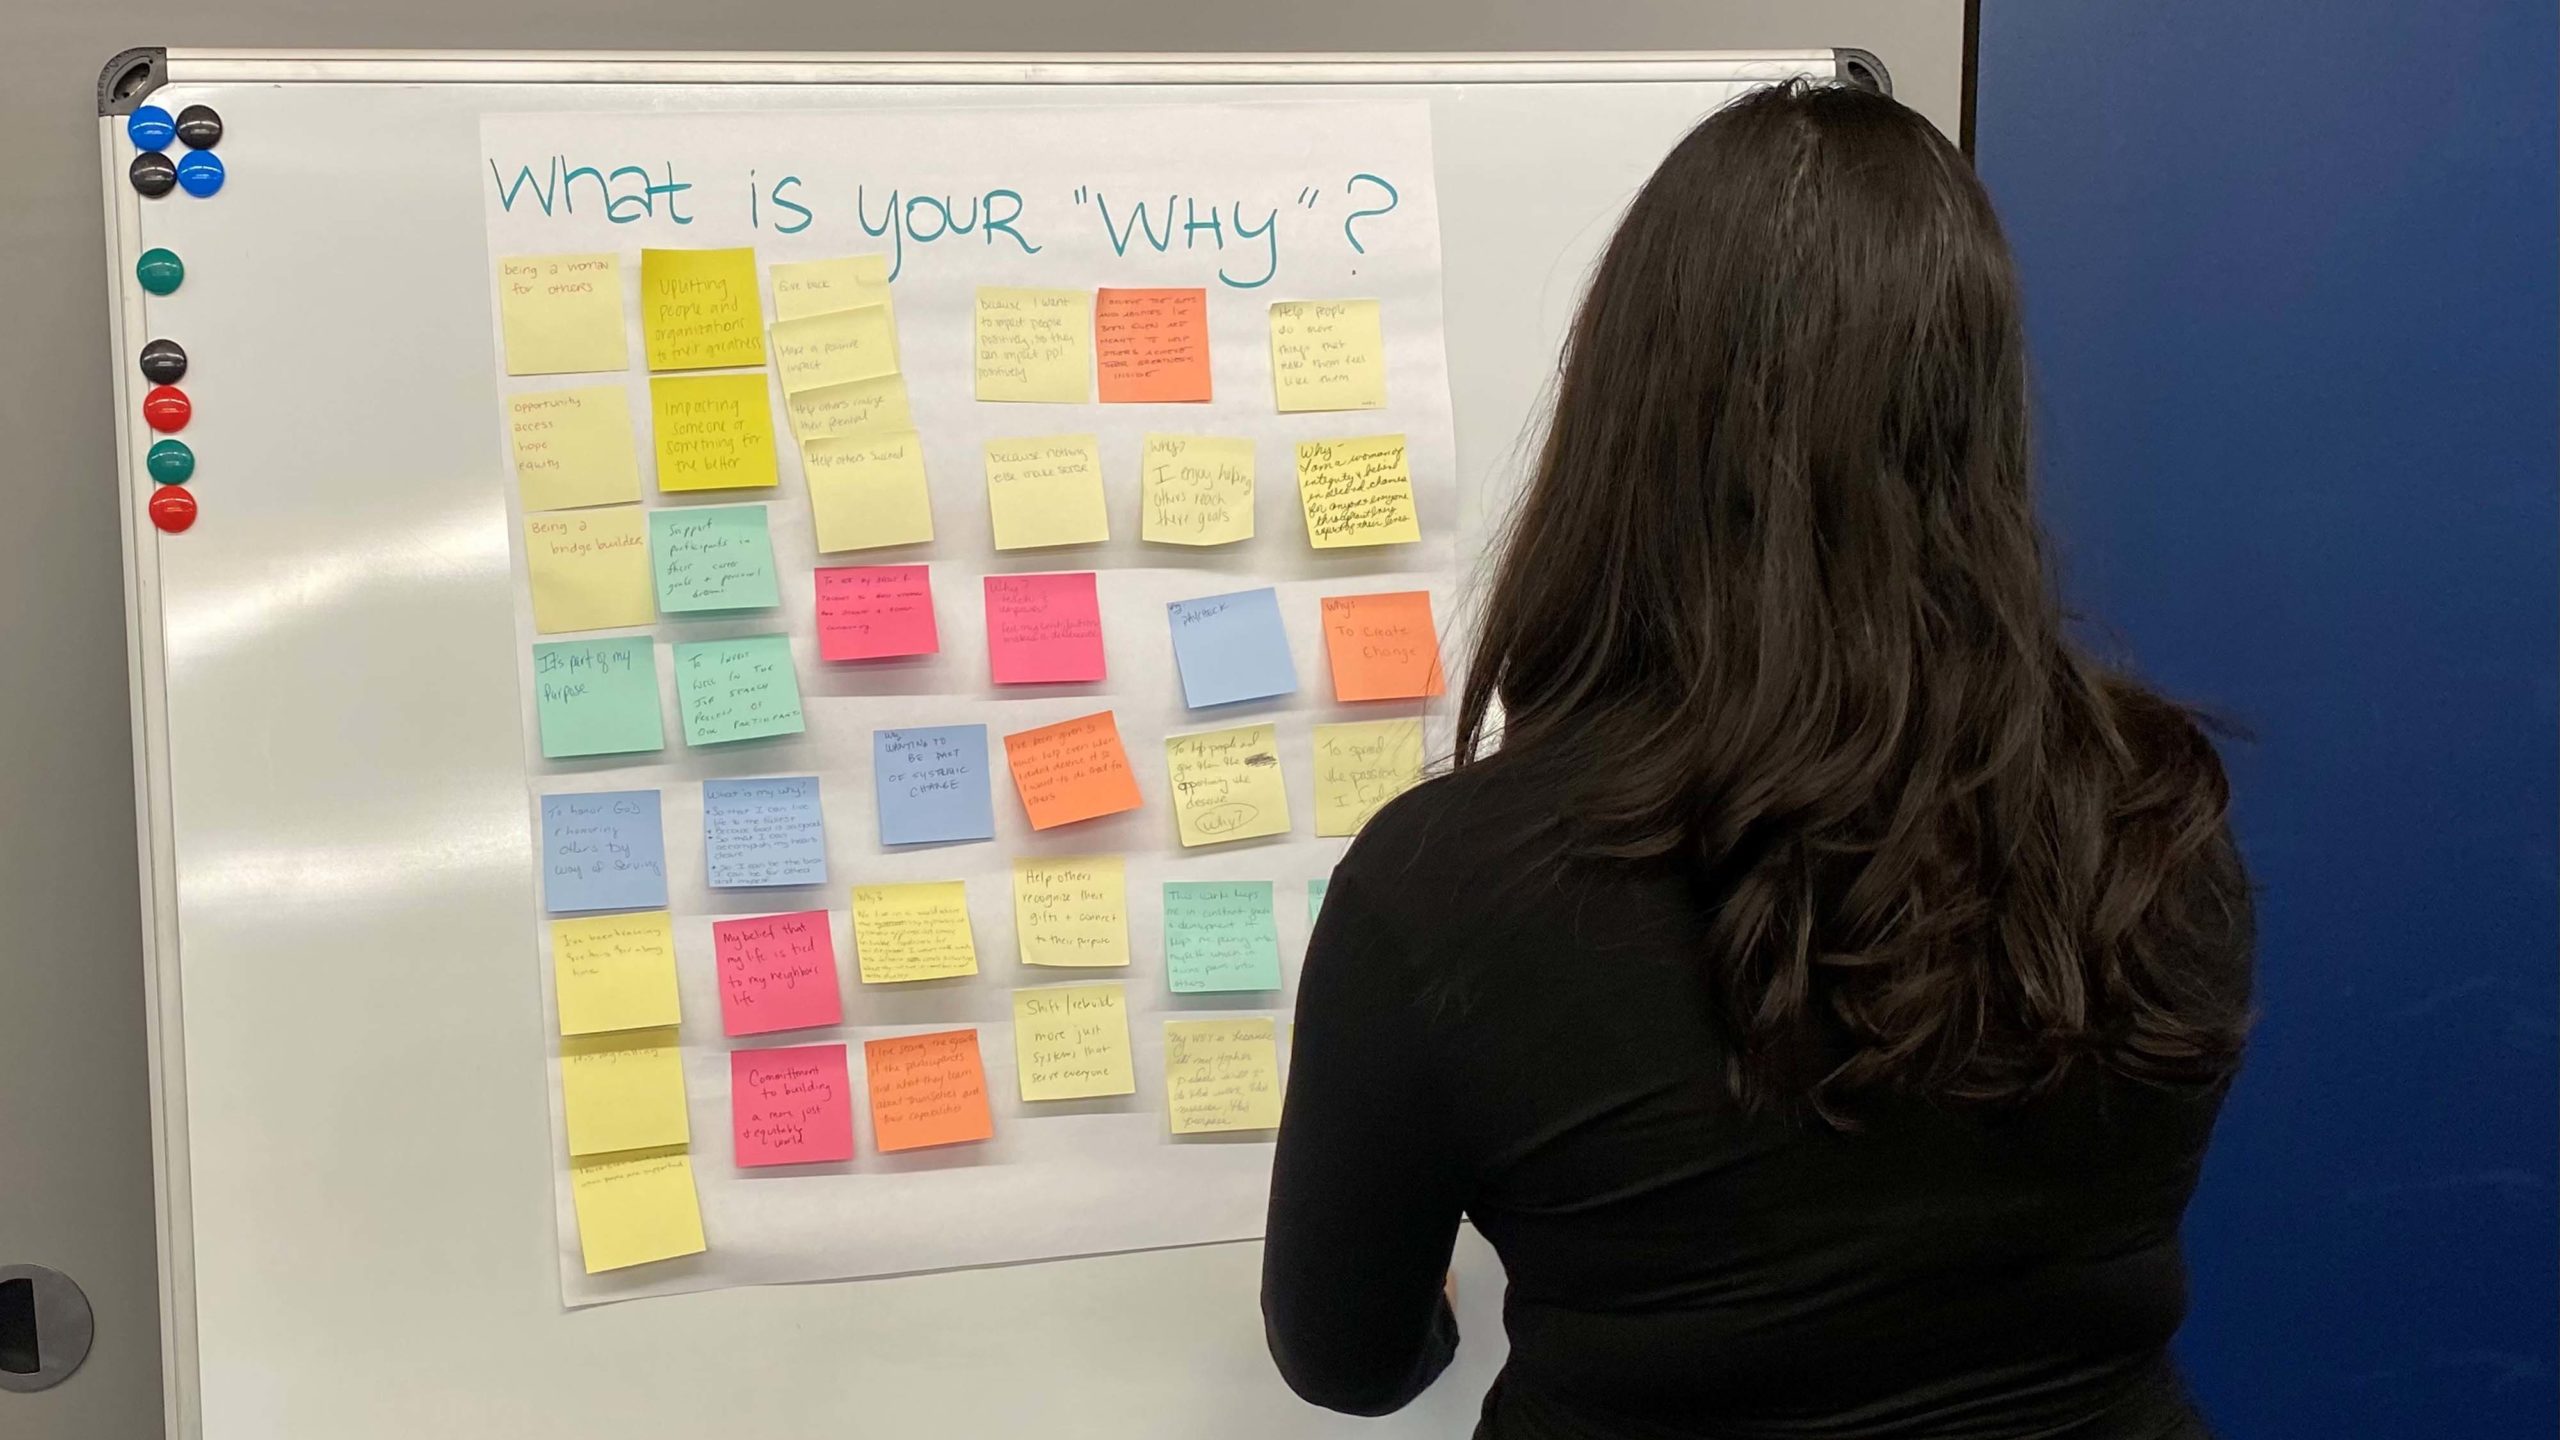 Woman looking at list of post-it notes hanging on the wall answering the question: "What is your 'why?'"